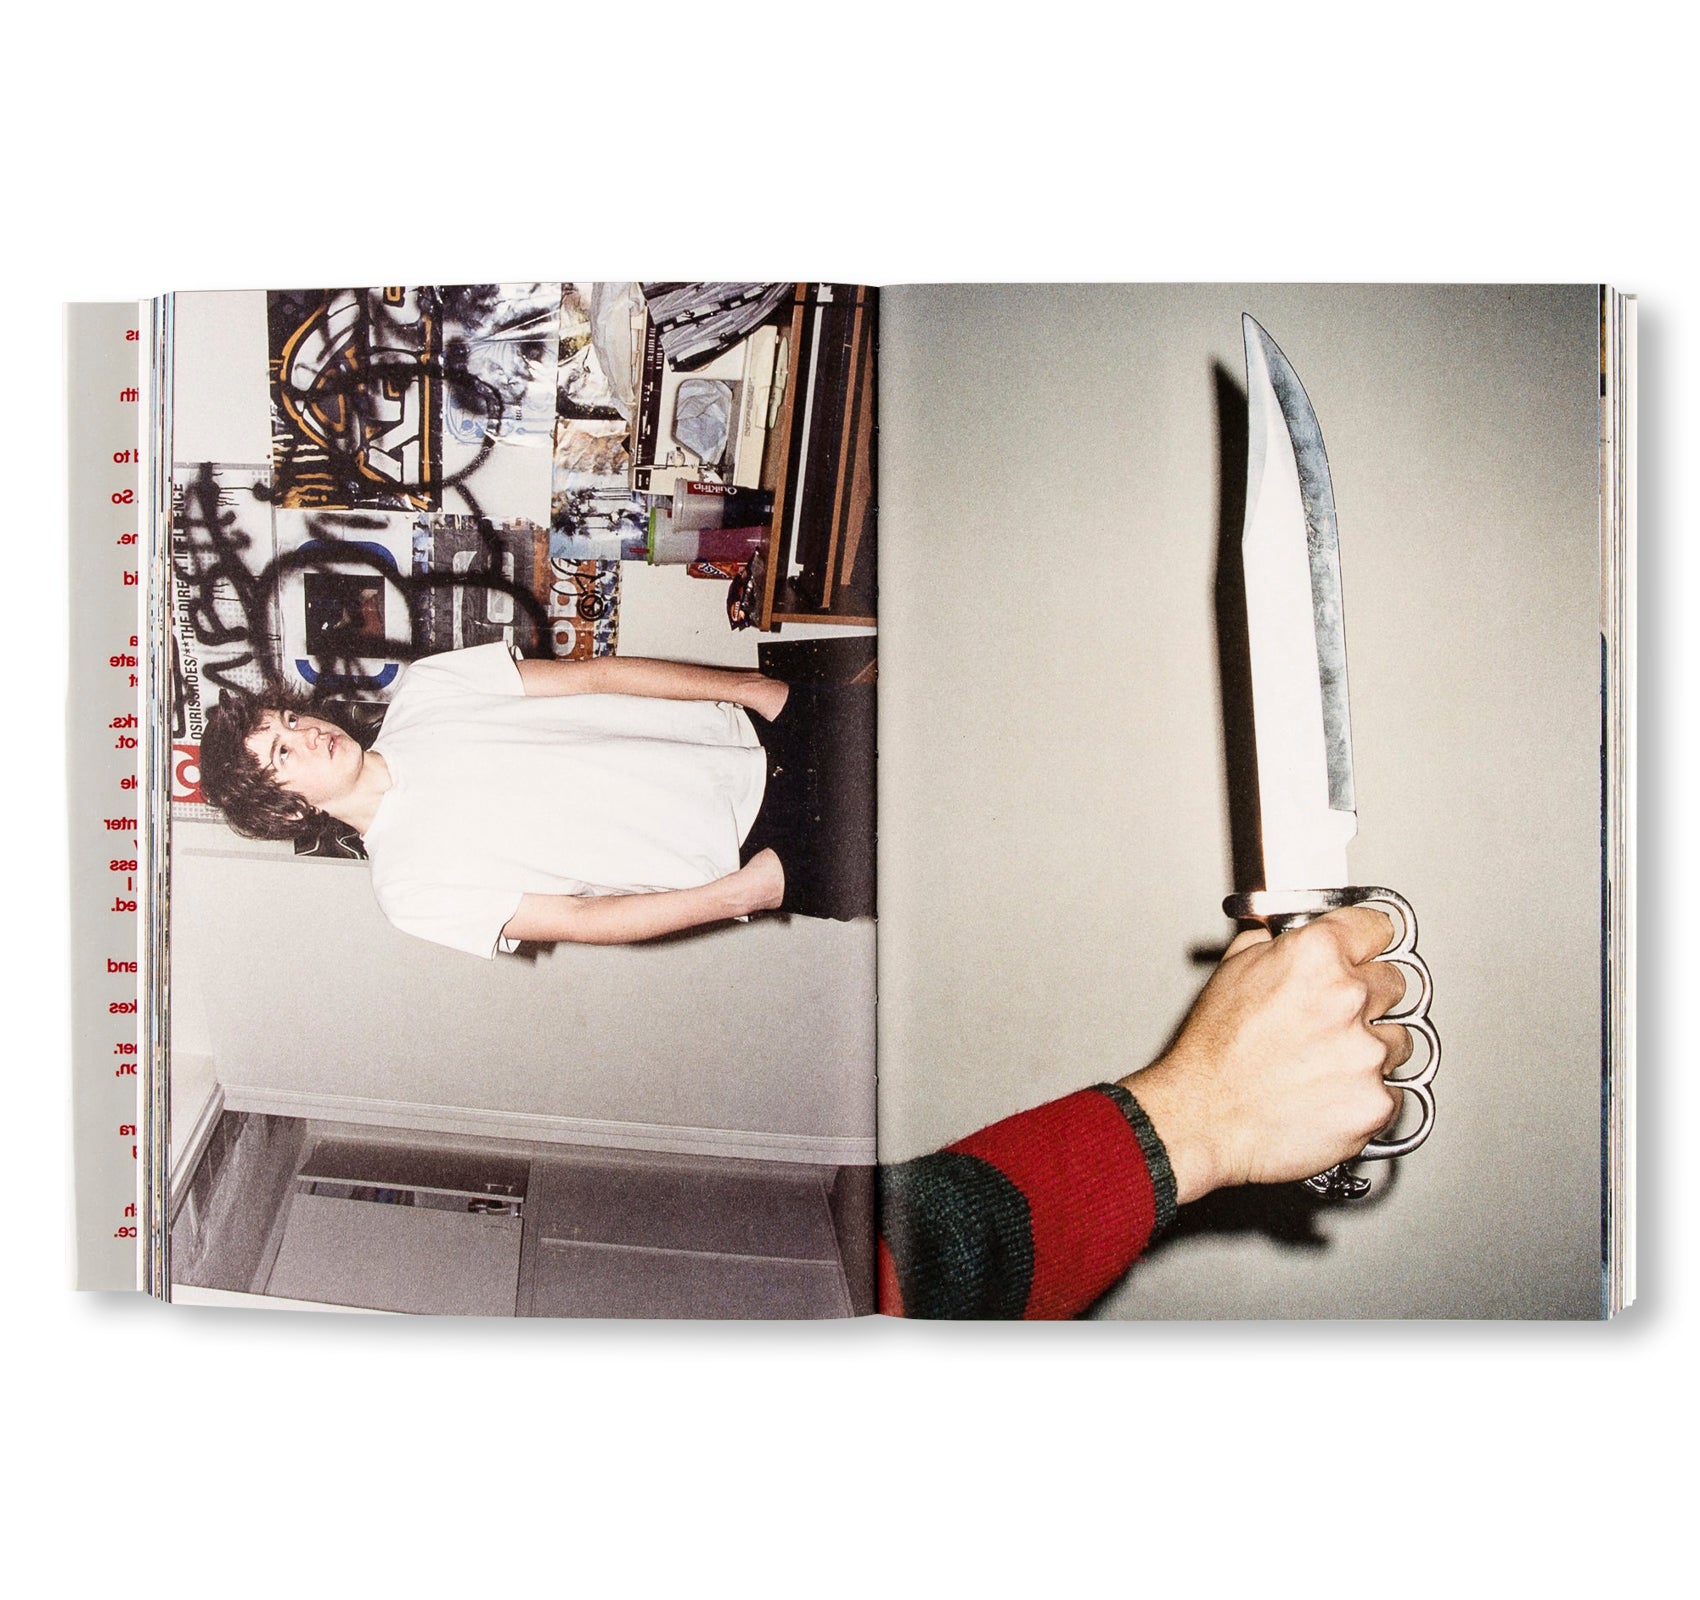 THE LAST SURVIVOR IS THE FIRST SUSPECT by Nick Haymes